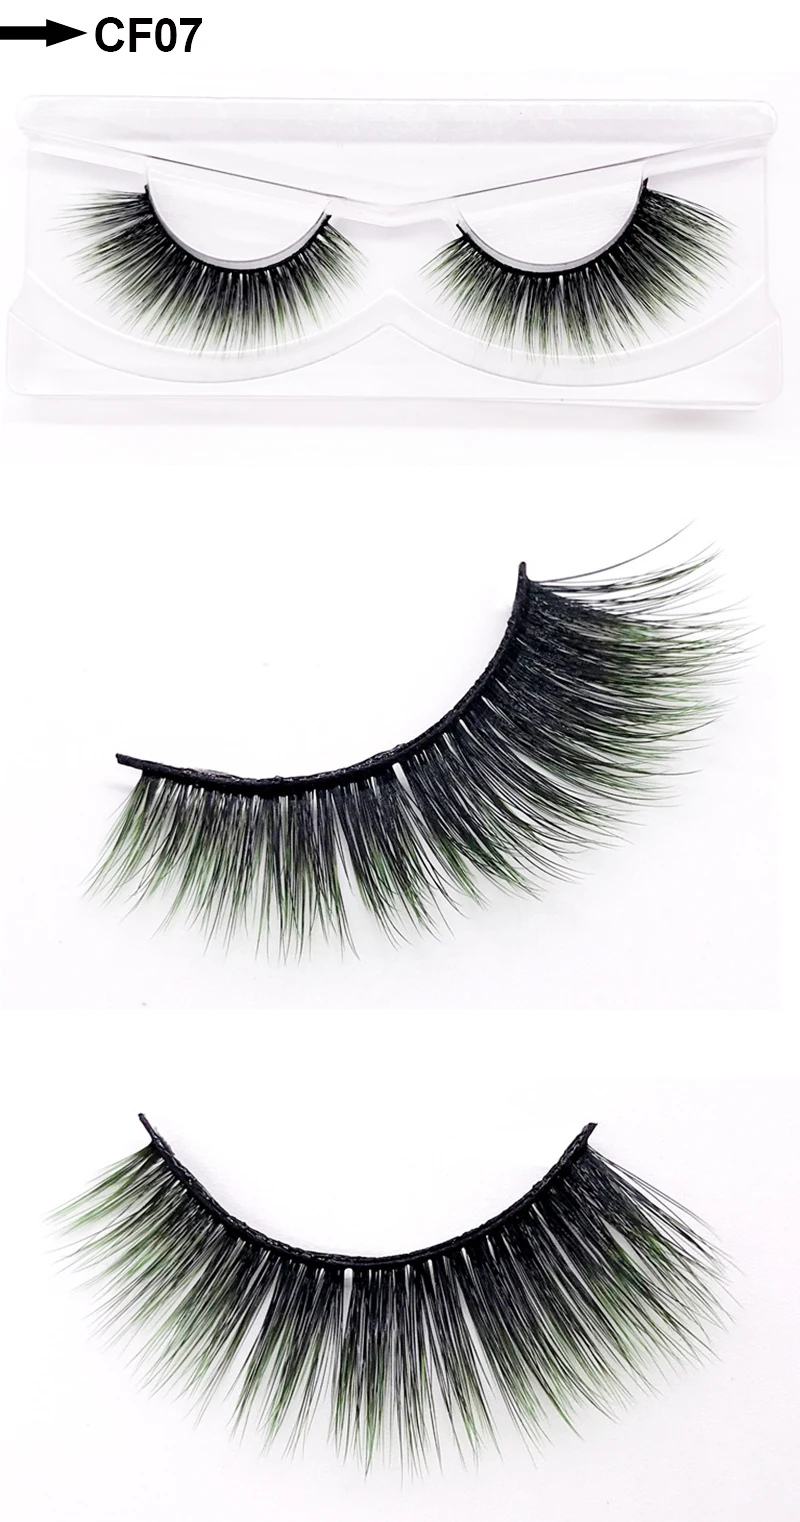 OKAYLASH White Color Natual Long Fluffy Soft Wispies False Eyelashes Natural Fake Snow Colored Lashes Cosplay Halloween Makeup -Outlet Maid Outfit Store H7f00c06d9aa545d99c62cba4339aa577h.jpg